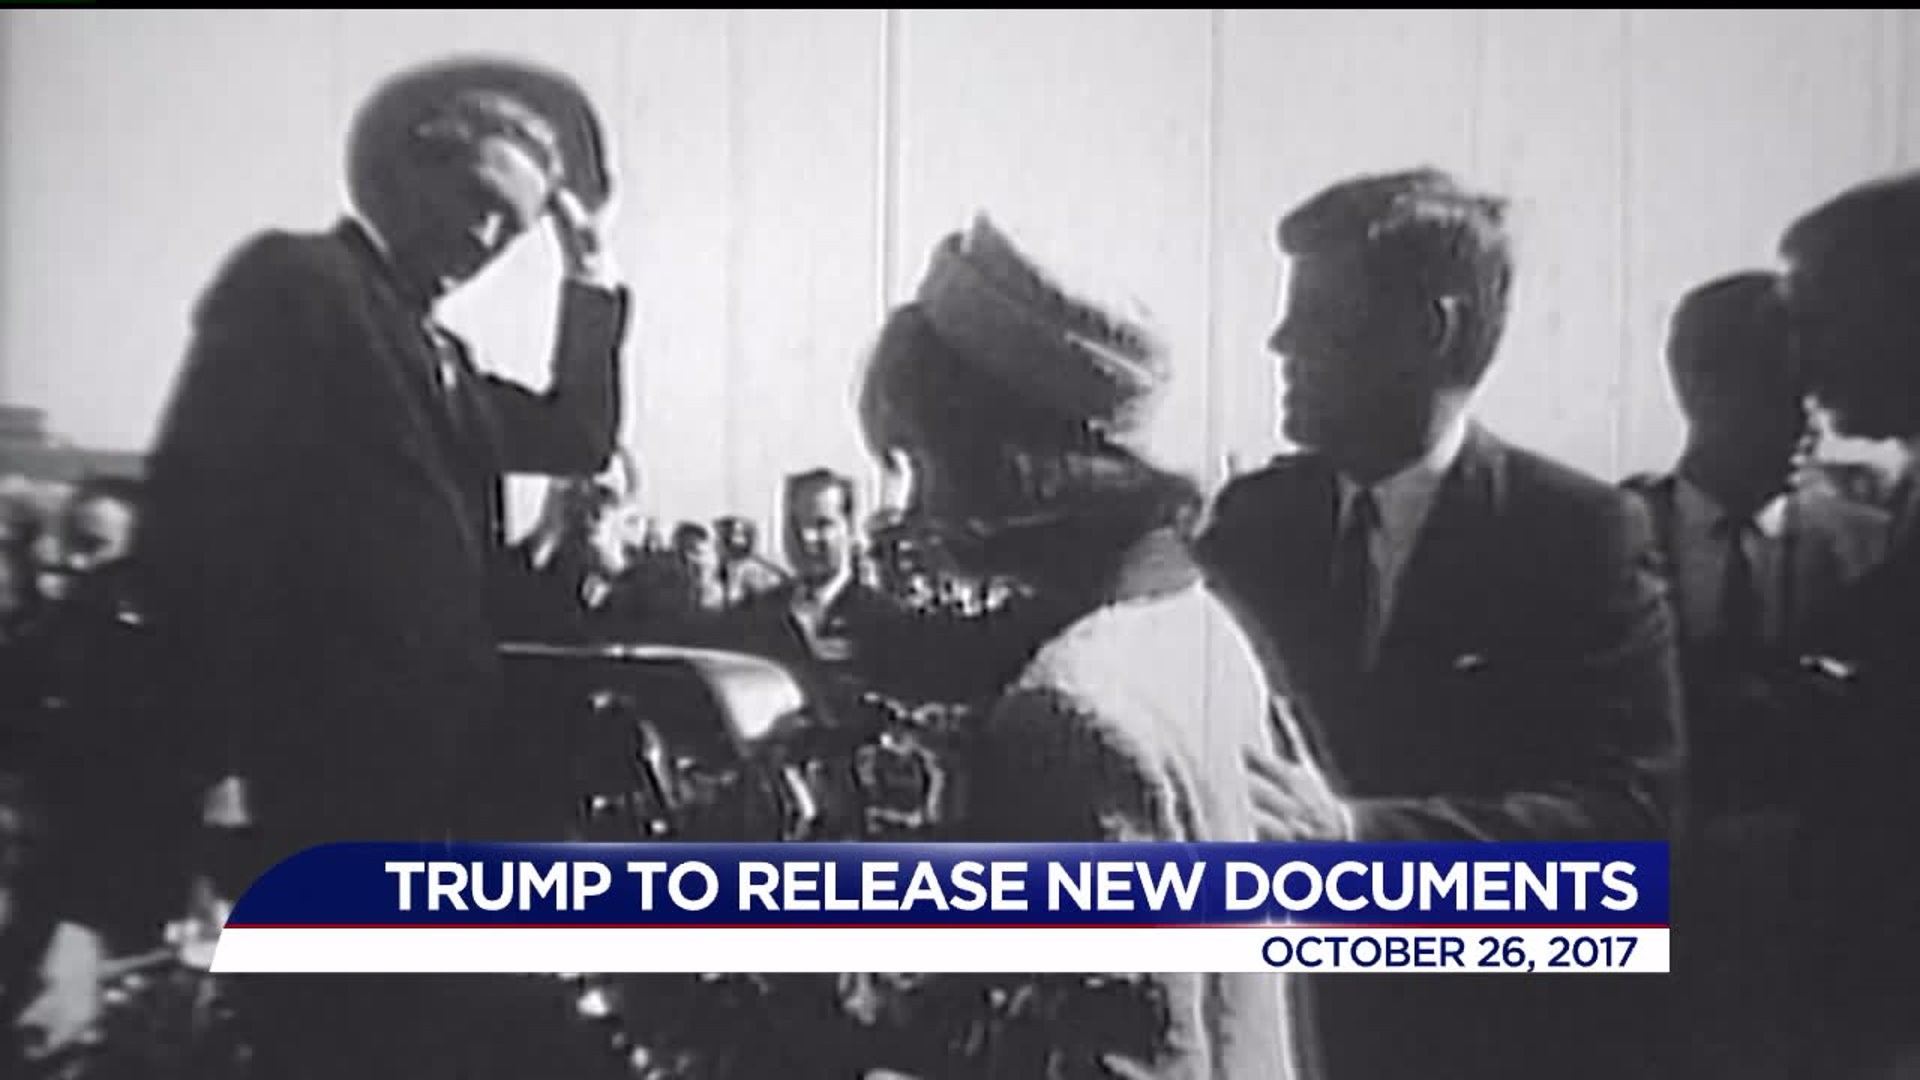 Trump to authorize release of new Kennedy documents